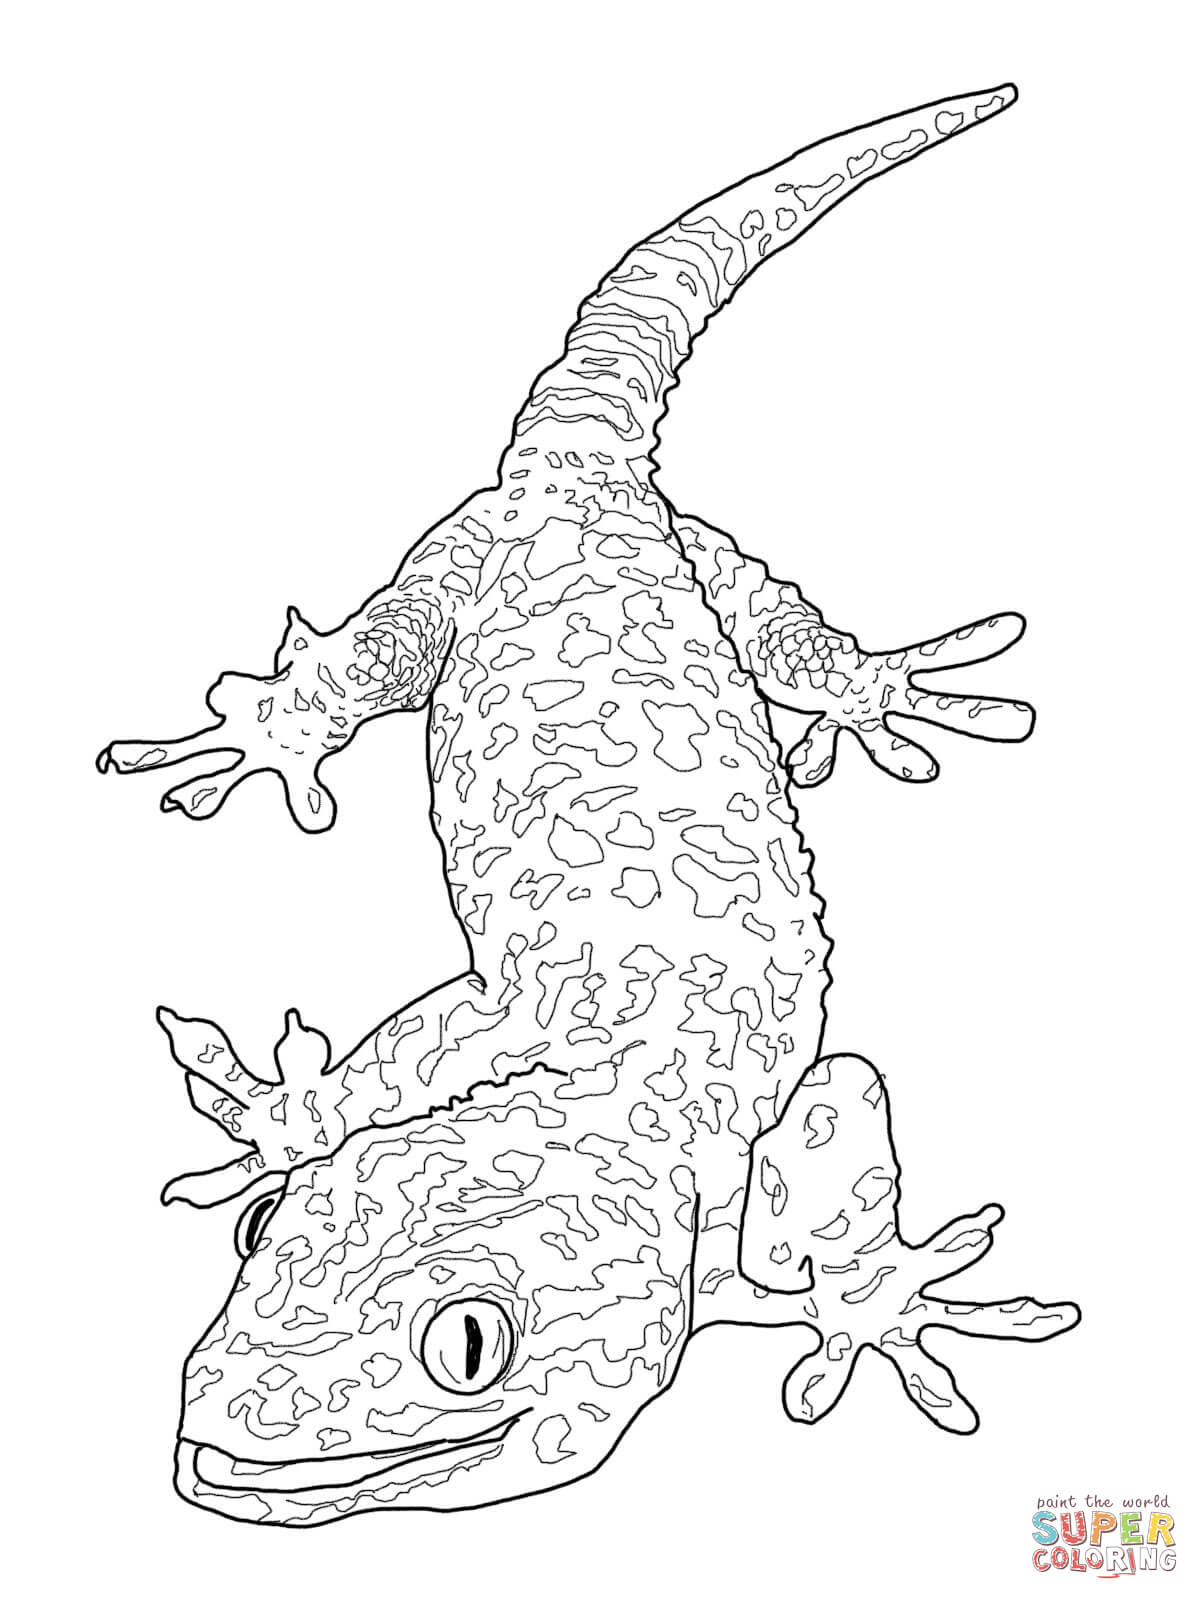 Tokay gecko coloring page free printable coloring pages